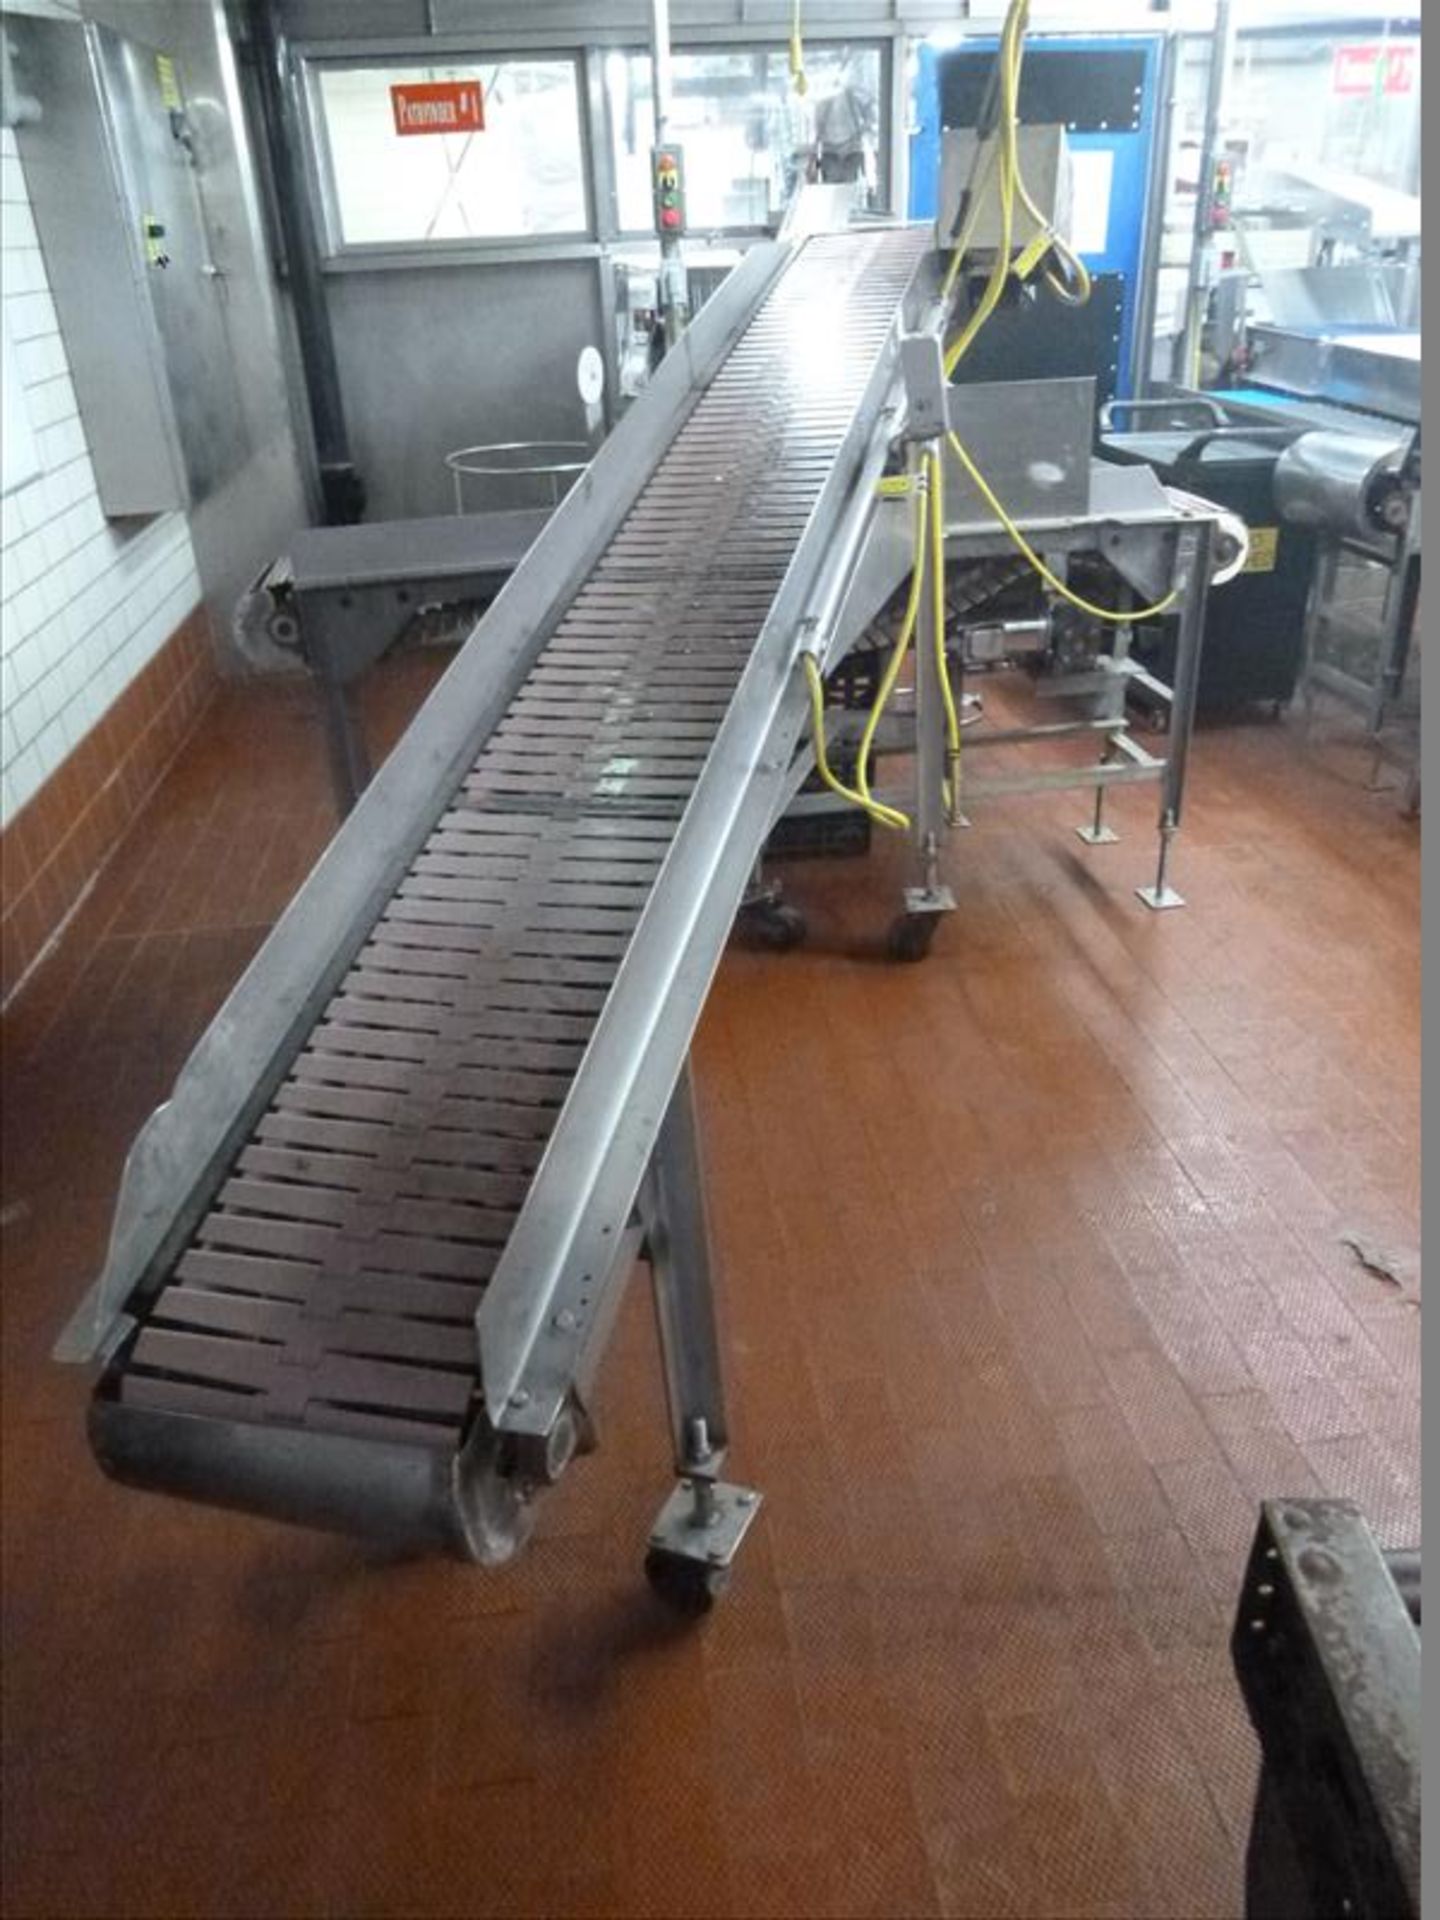 12 in. x 116 in. s/s frame inclined conveyor on casters w/ plastic conveyor belt